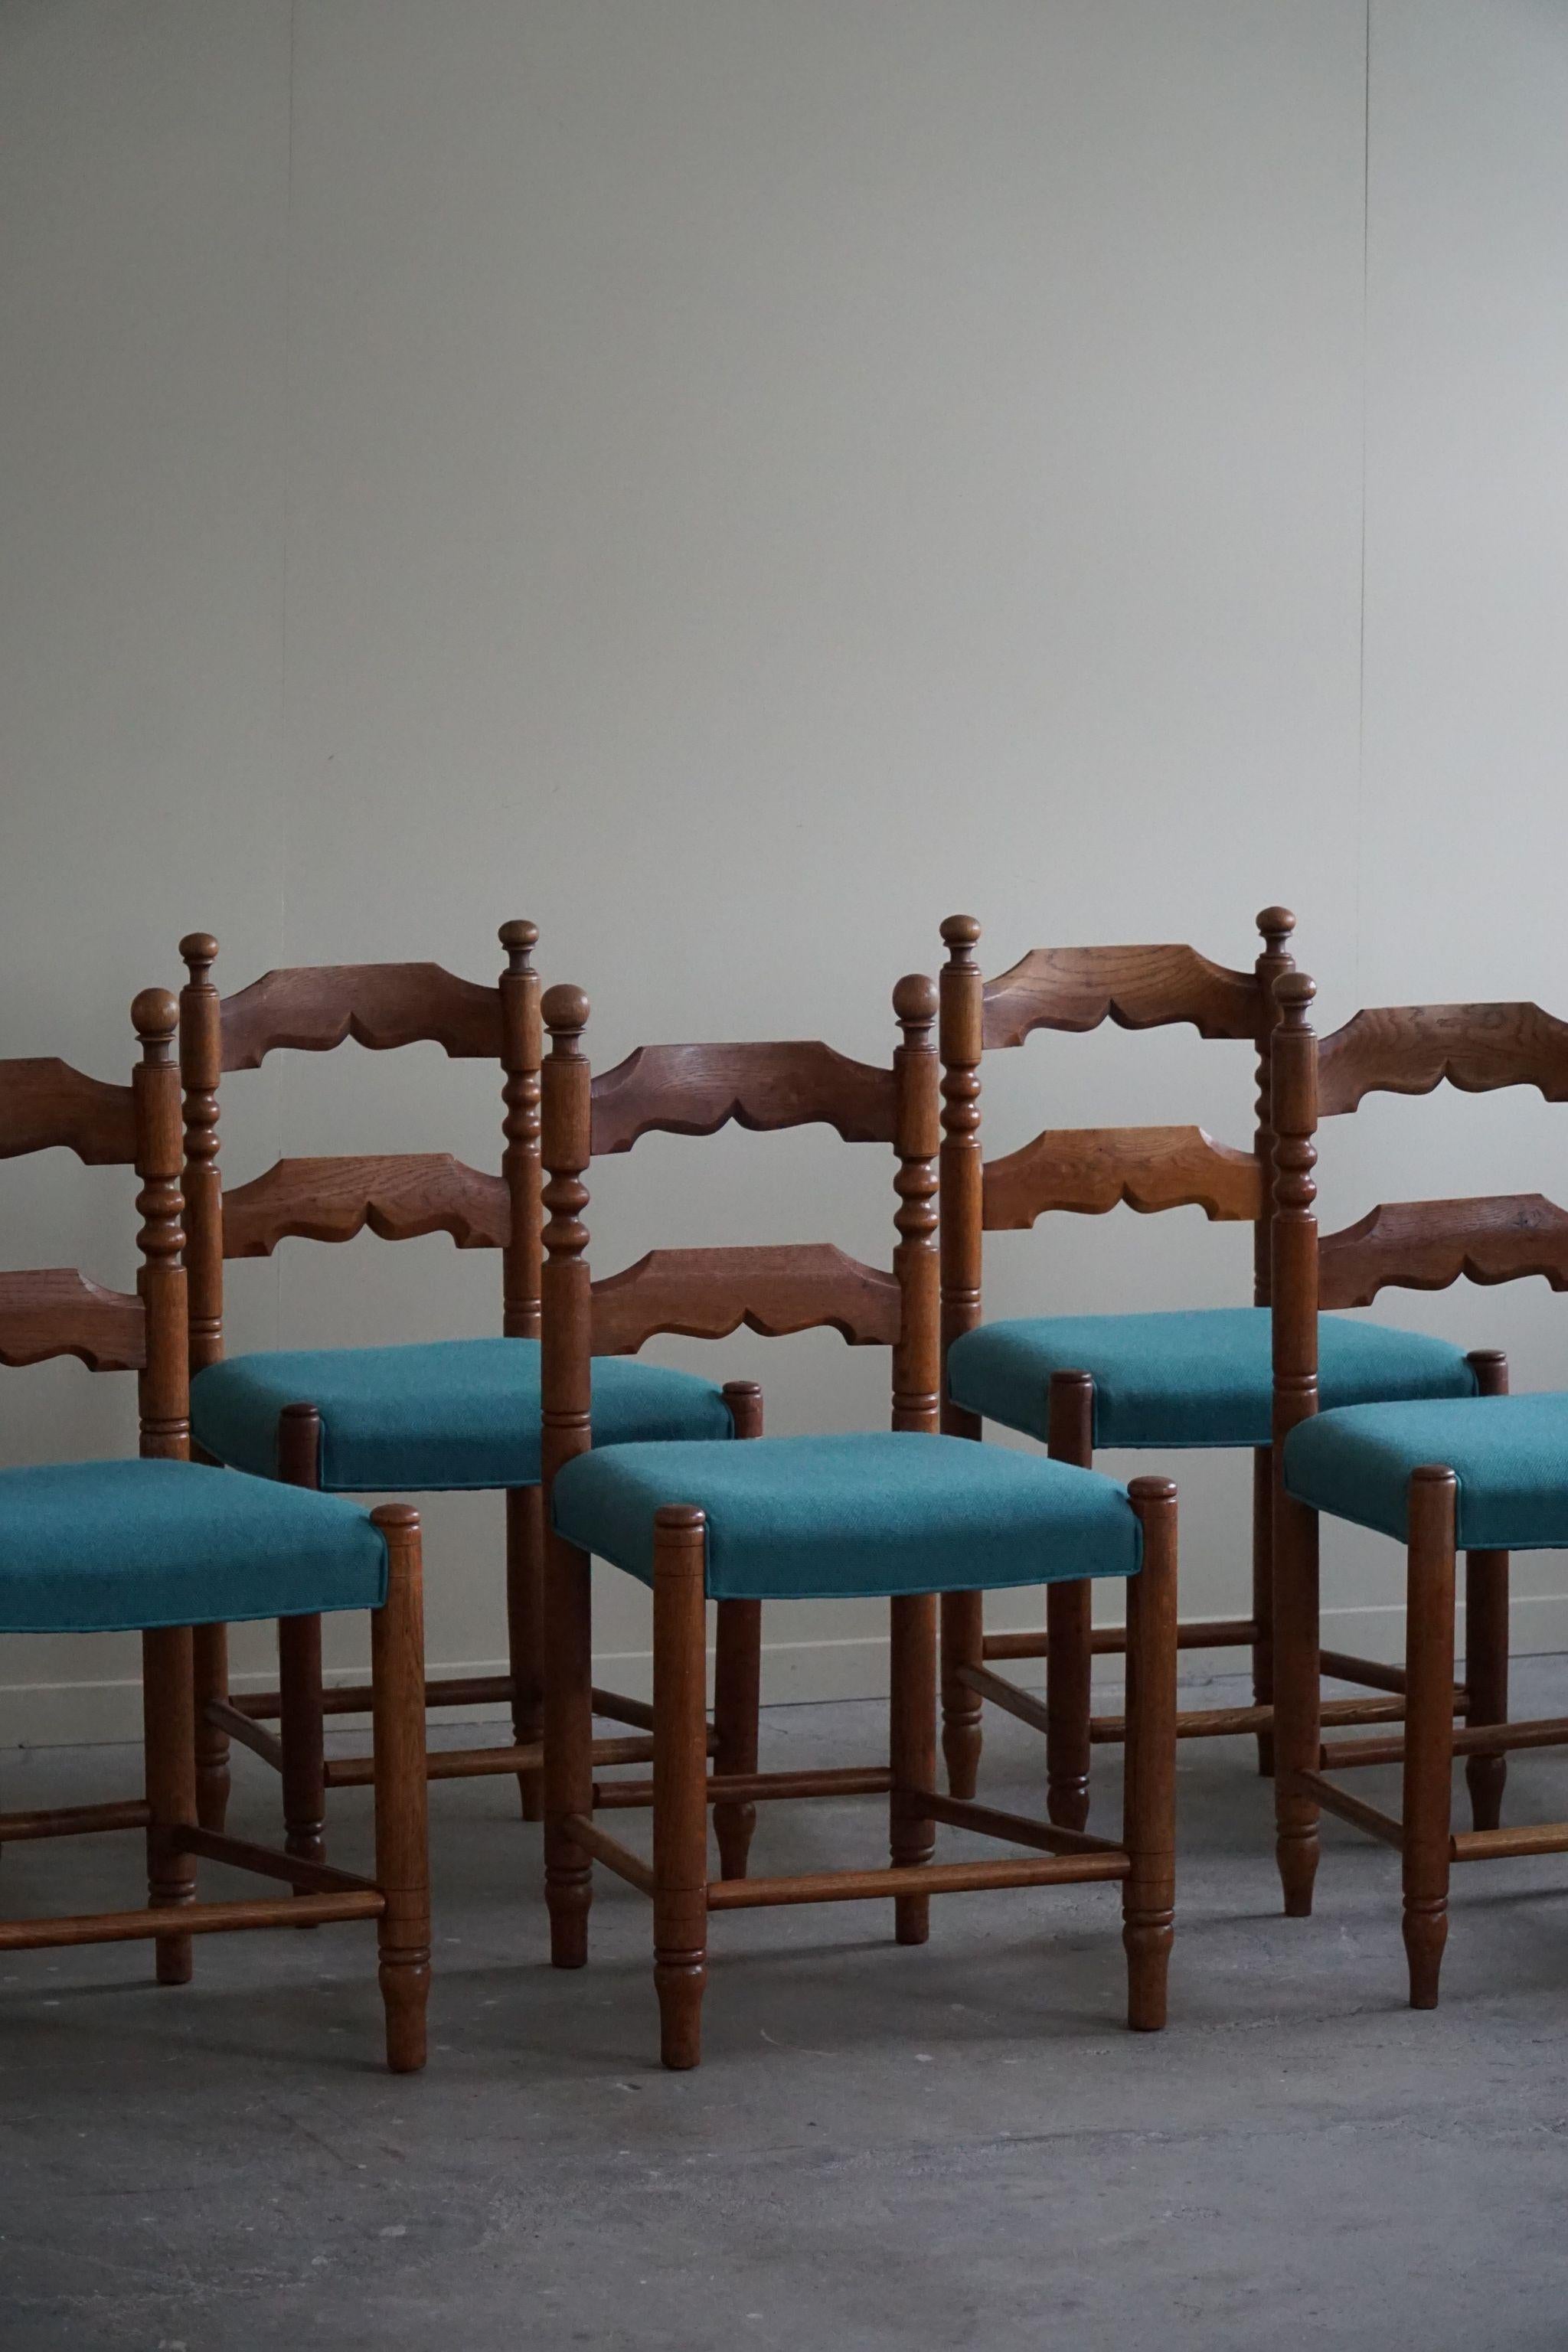 A charming set of 8 brutalist dining chairs in solid stained oak & wool seats. Made by a French cabinetmaker in the 1950s. A sculptural design that matches many interior styles. 

These chairs are in a good vintage condition.